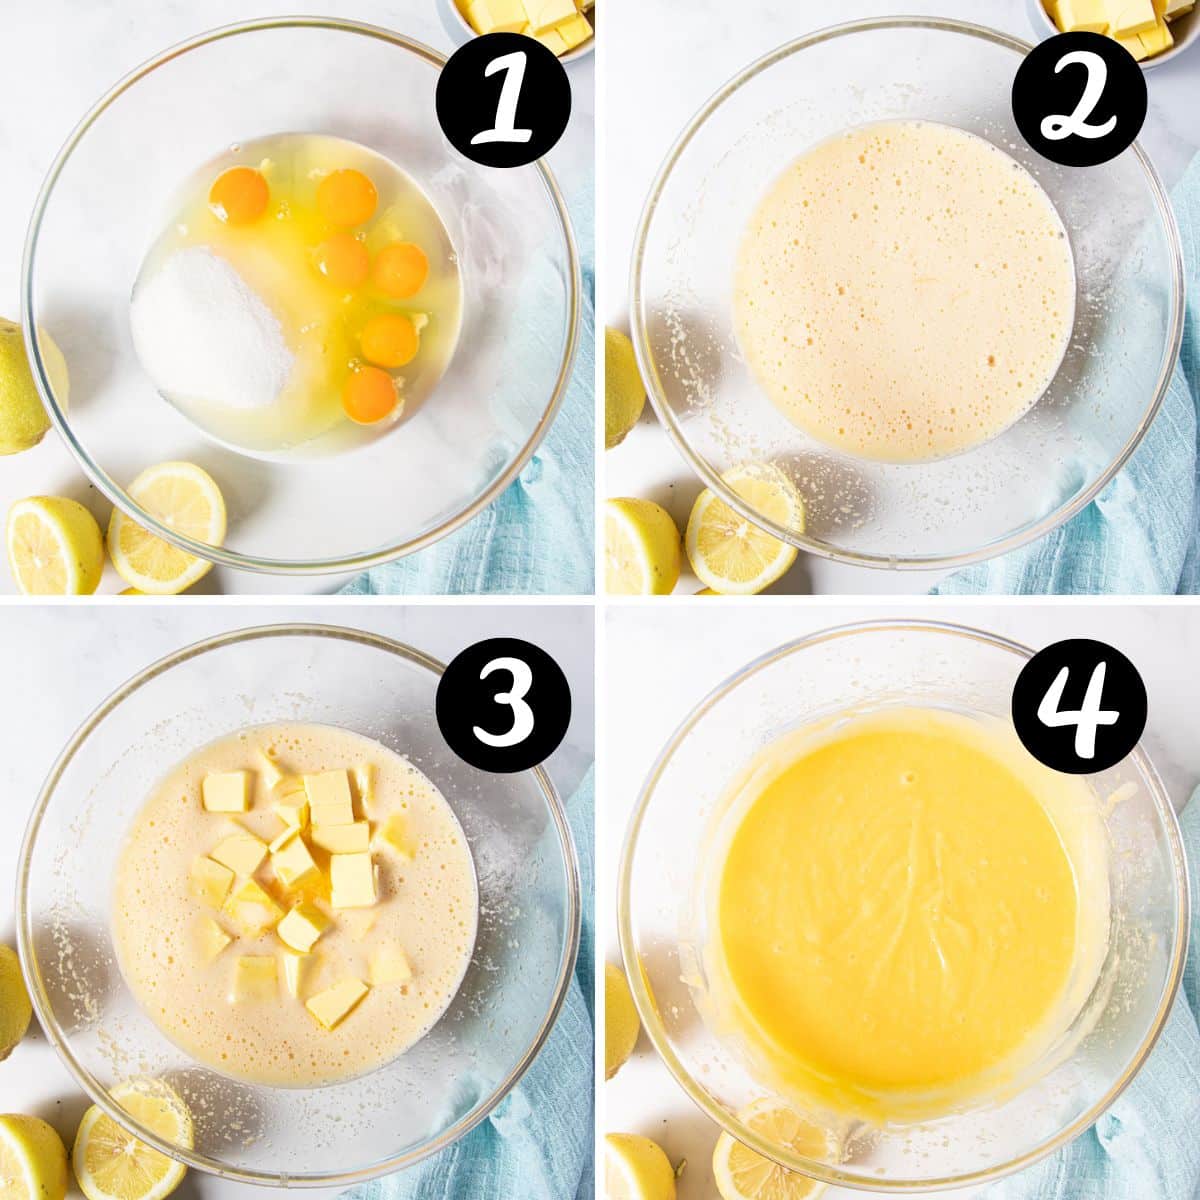 eggs, sugar, butter and lemon juice being combined in a bowl.